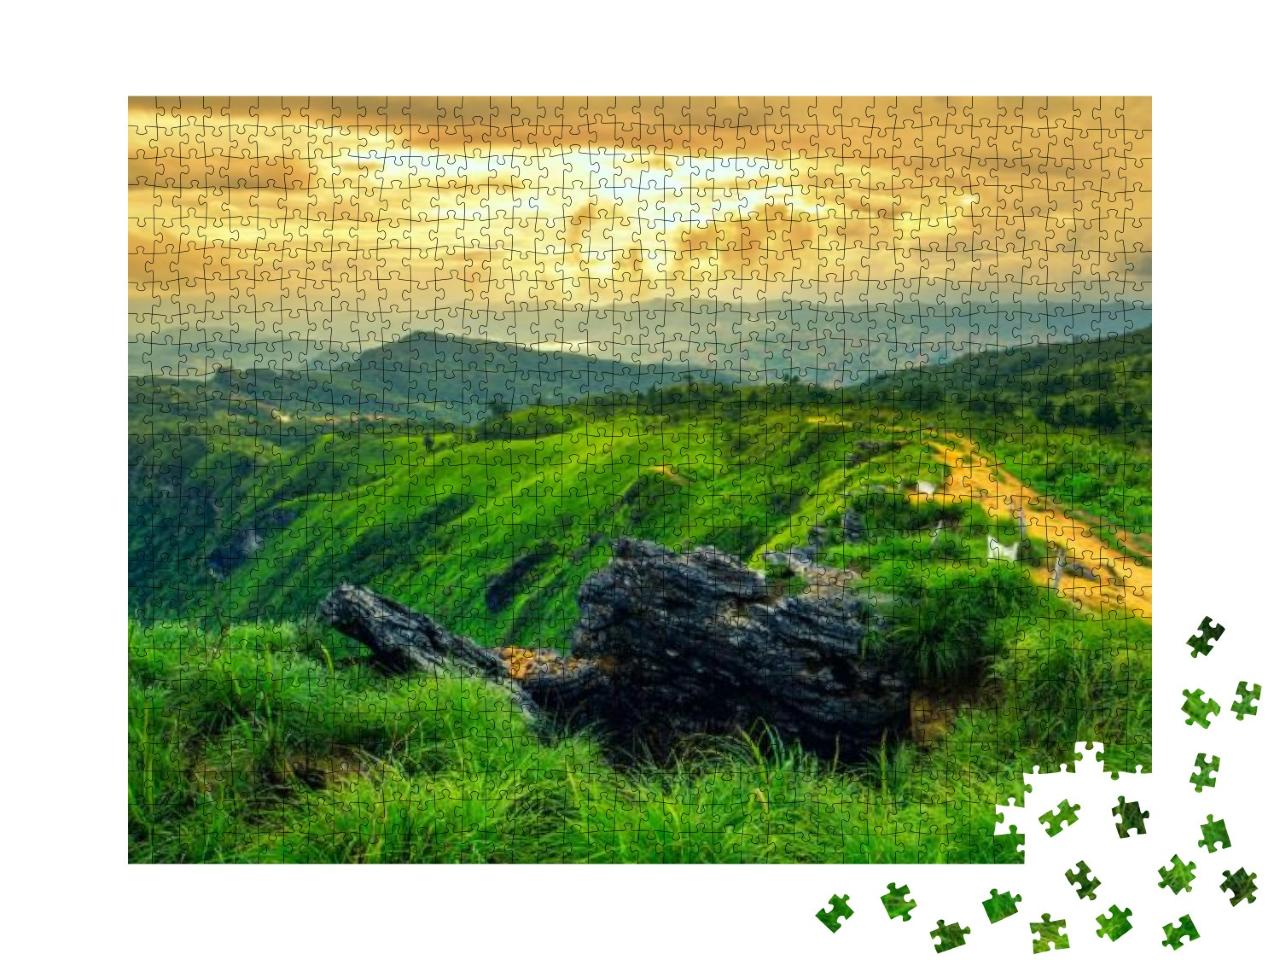 Phu Chi Fa is a Natural Tourist Attraction that Park Offi... Jigsaw Puzzle with 1000 pieces